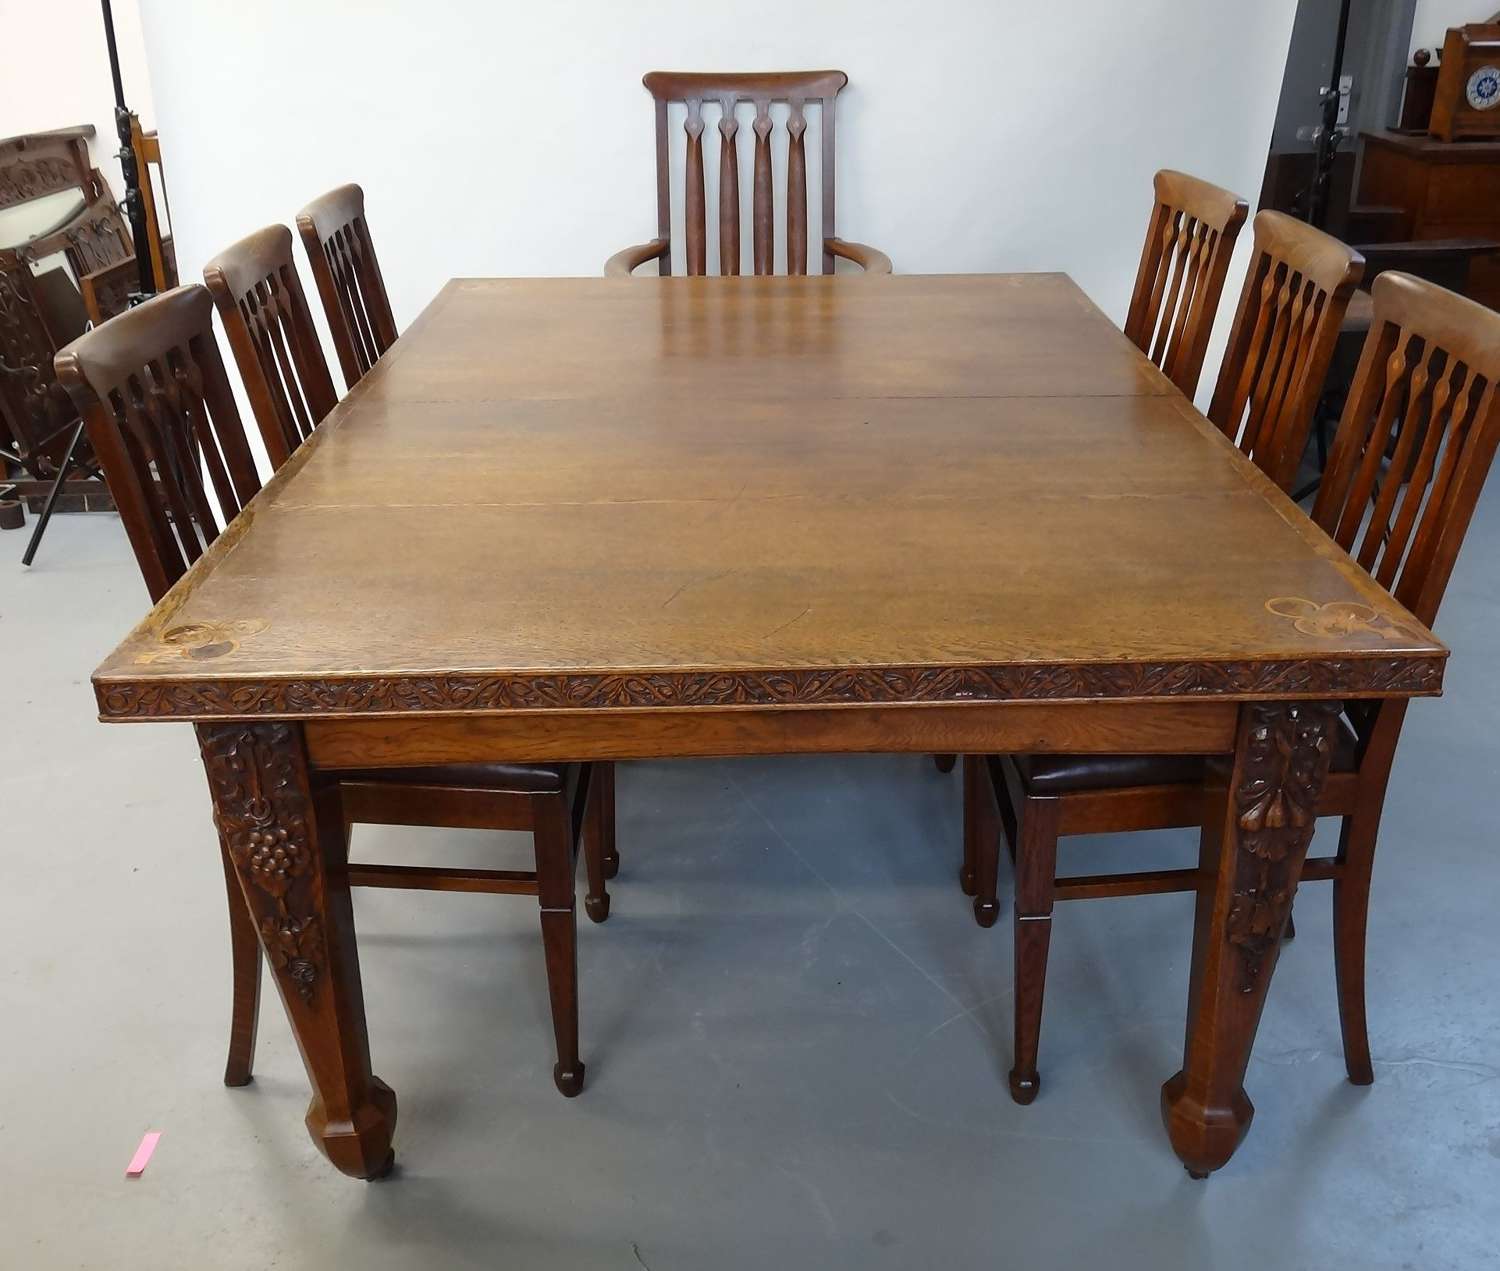 Rare Arthur Simpson of Kendal inlaid carved dining table and chairs